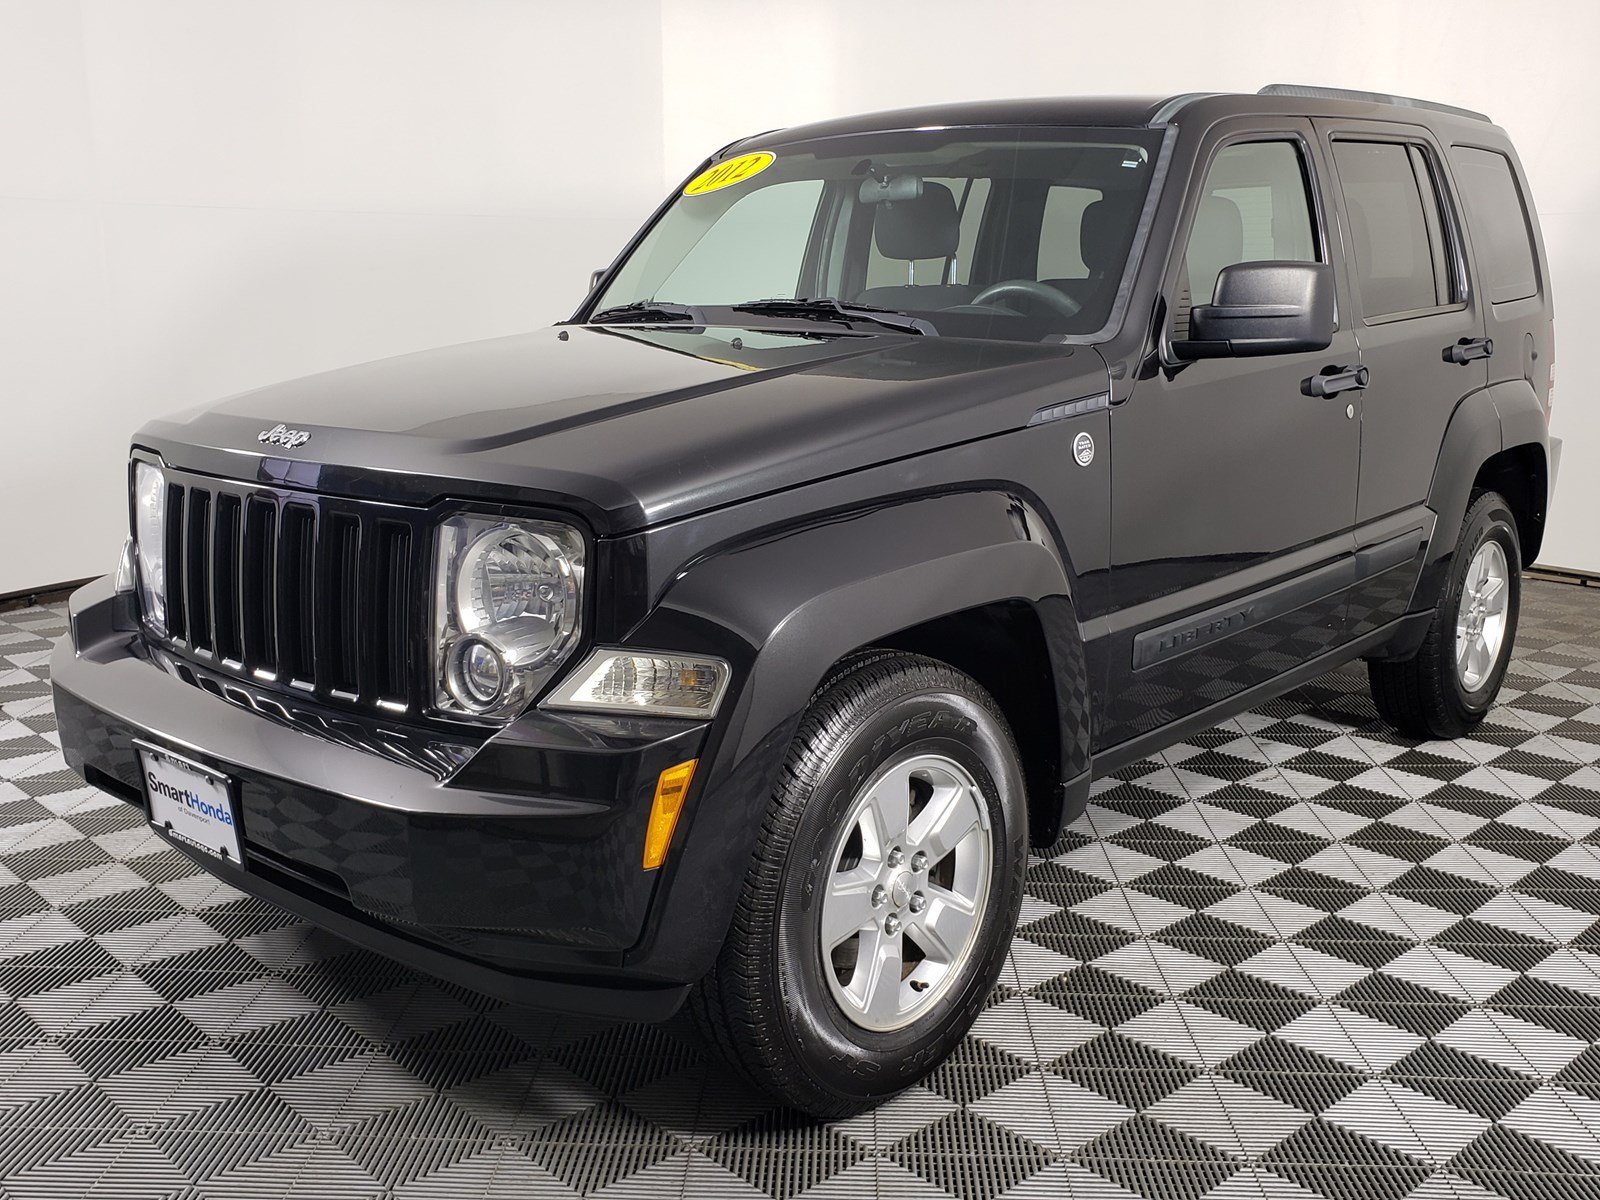 PreOwned 2012 Jeep Liberty Sport Sport Utility in